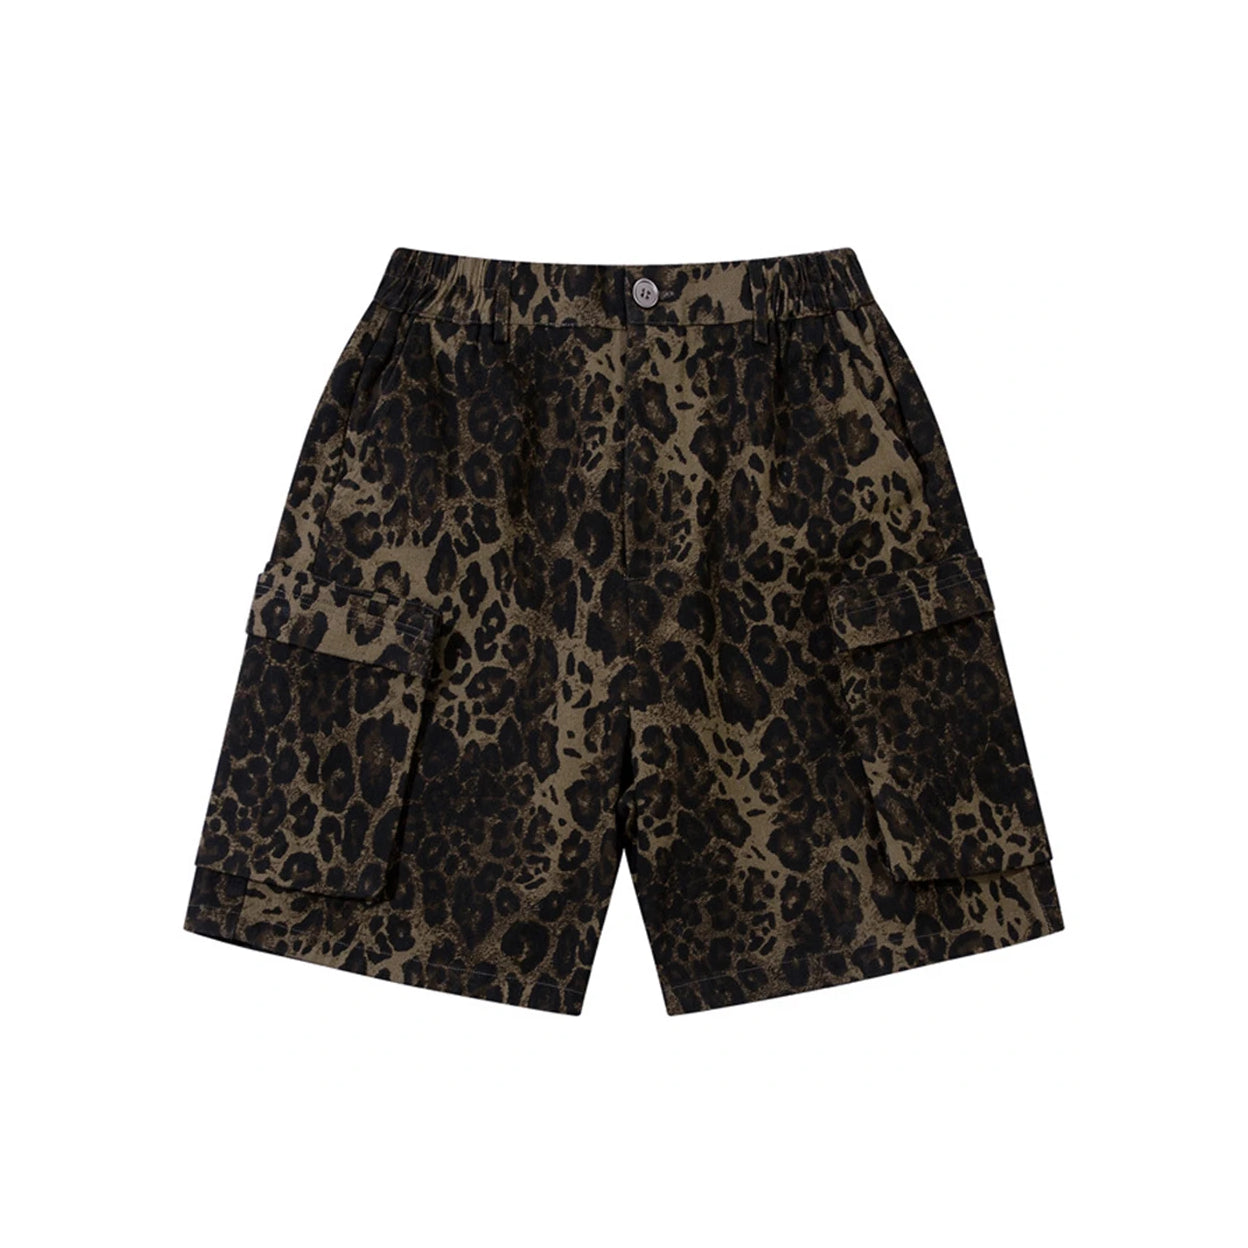 Men's Shorts | Streetwear at Before the High Street